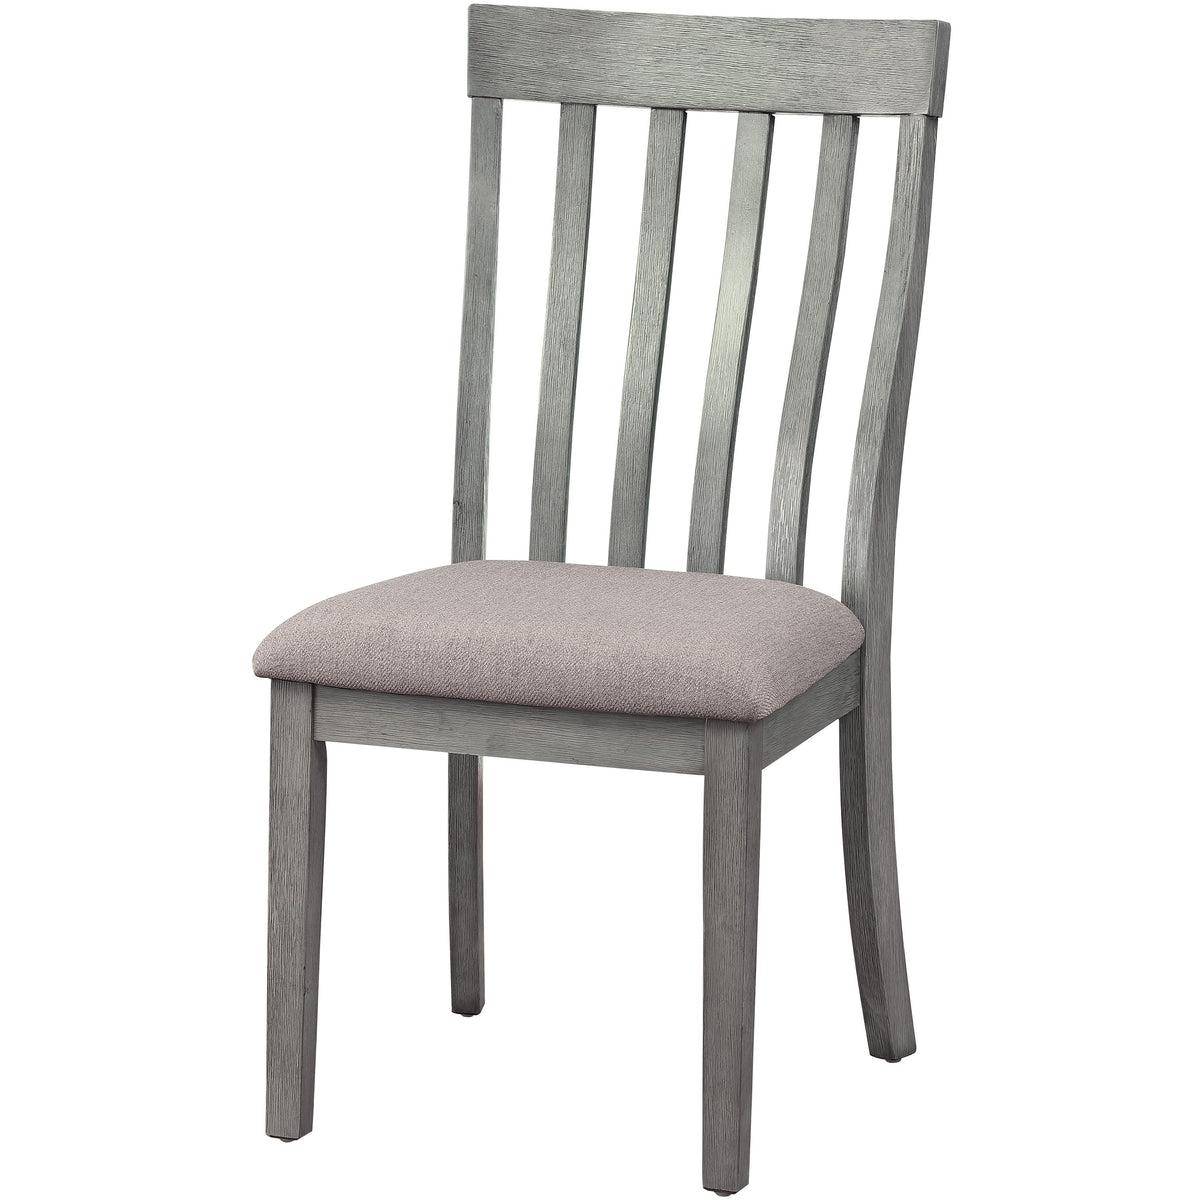 Vertical Slatted Curved Back Side Chair with Fabric Seat, Set of 2, Gray - BM220888